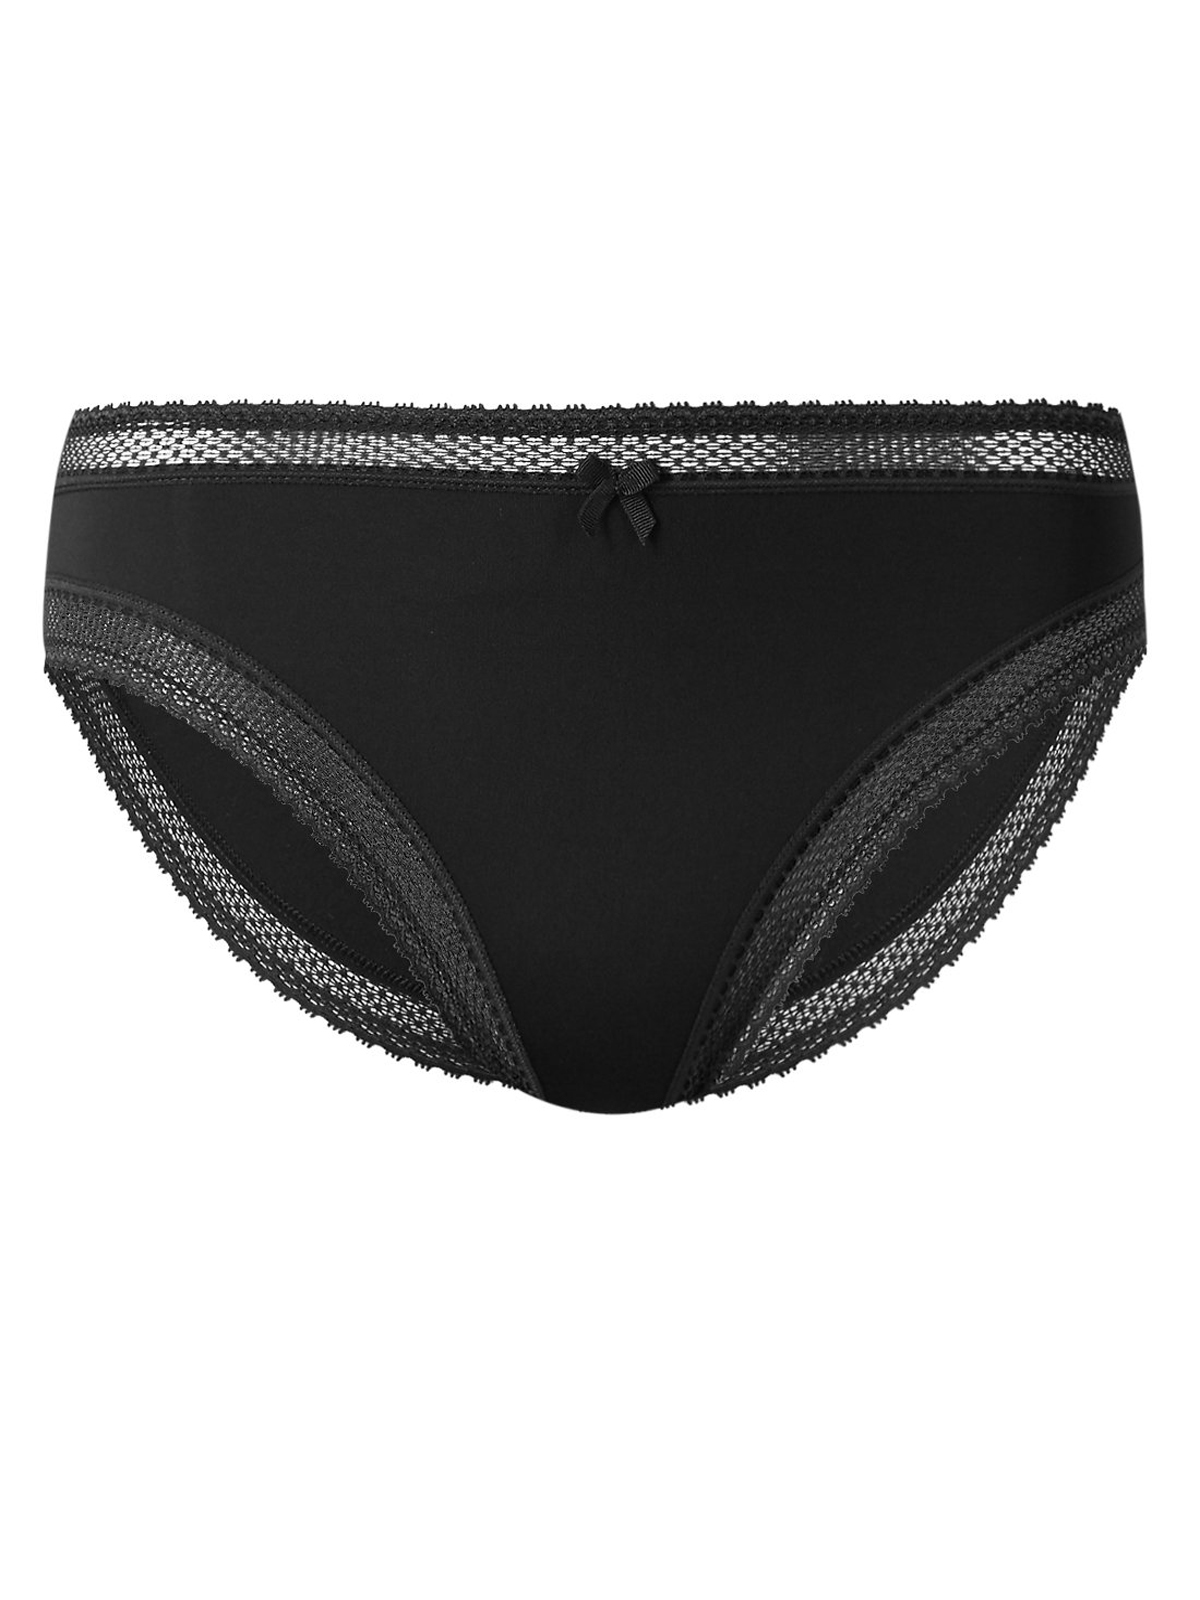 Marks and Spencer - - M&5 BLACK Lace Trim High Leg Knickers - Size 10